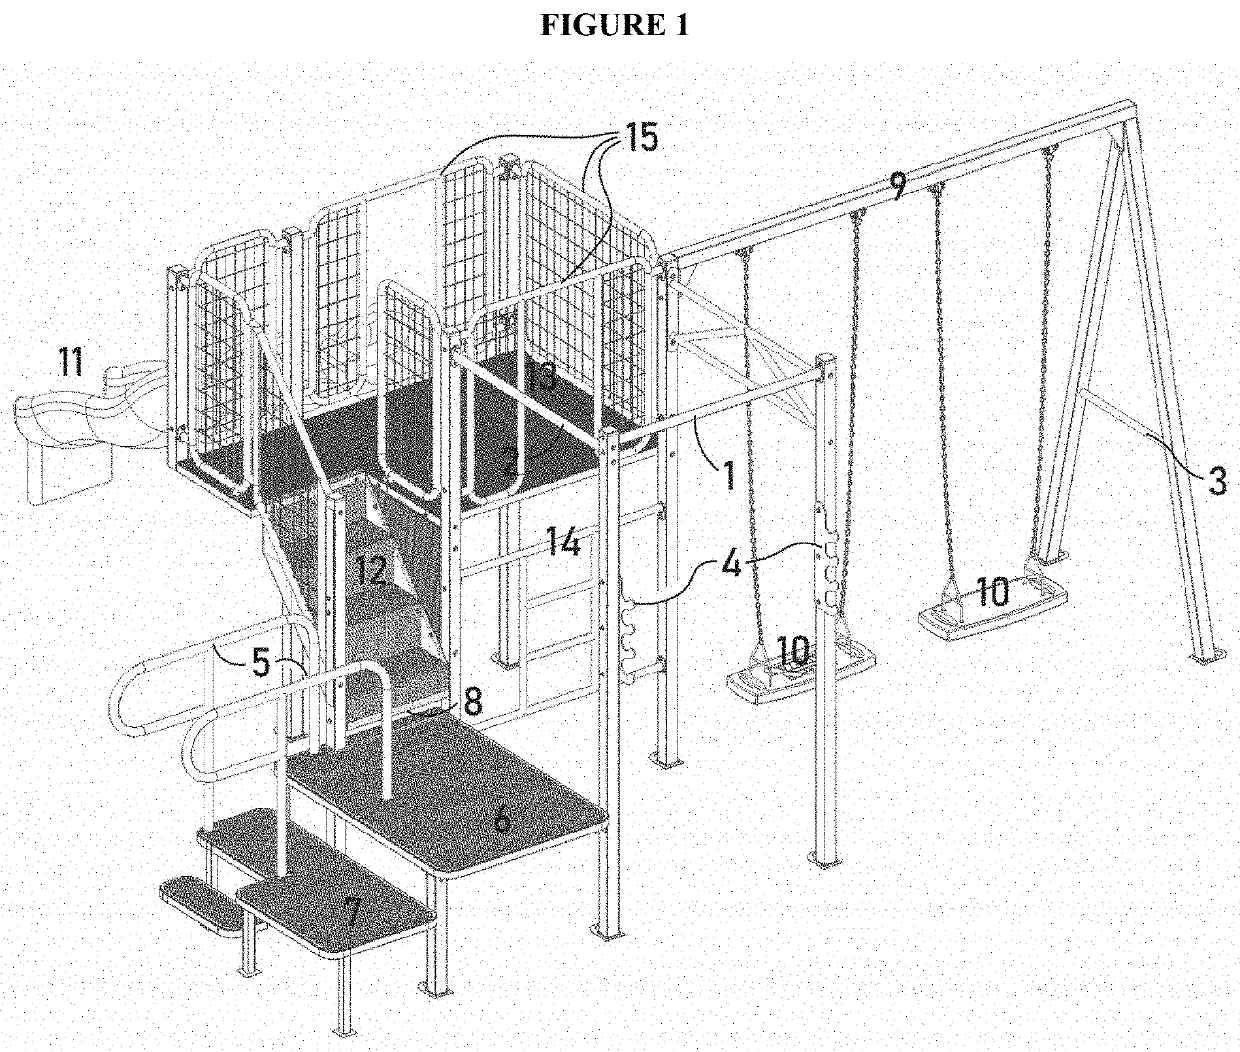 Playset with integrated workout stations